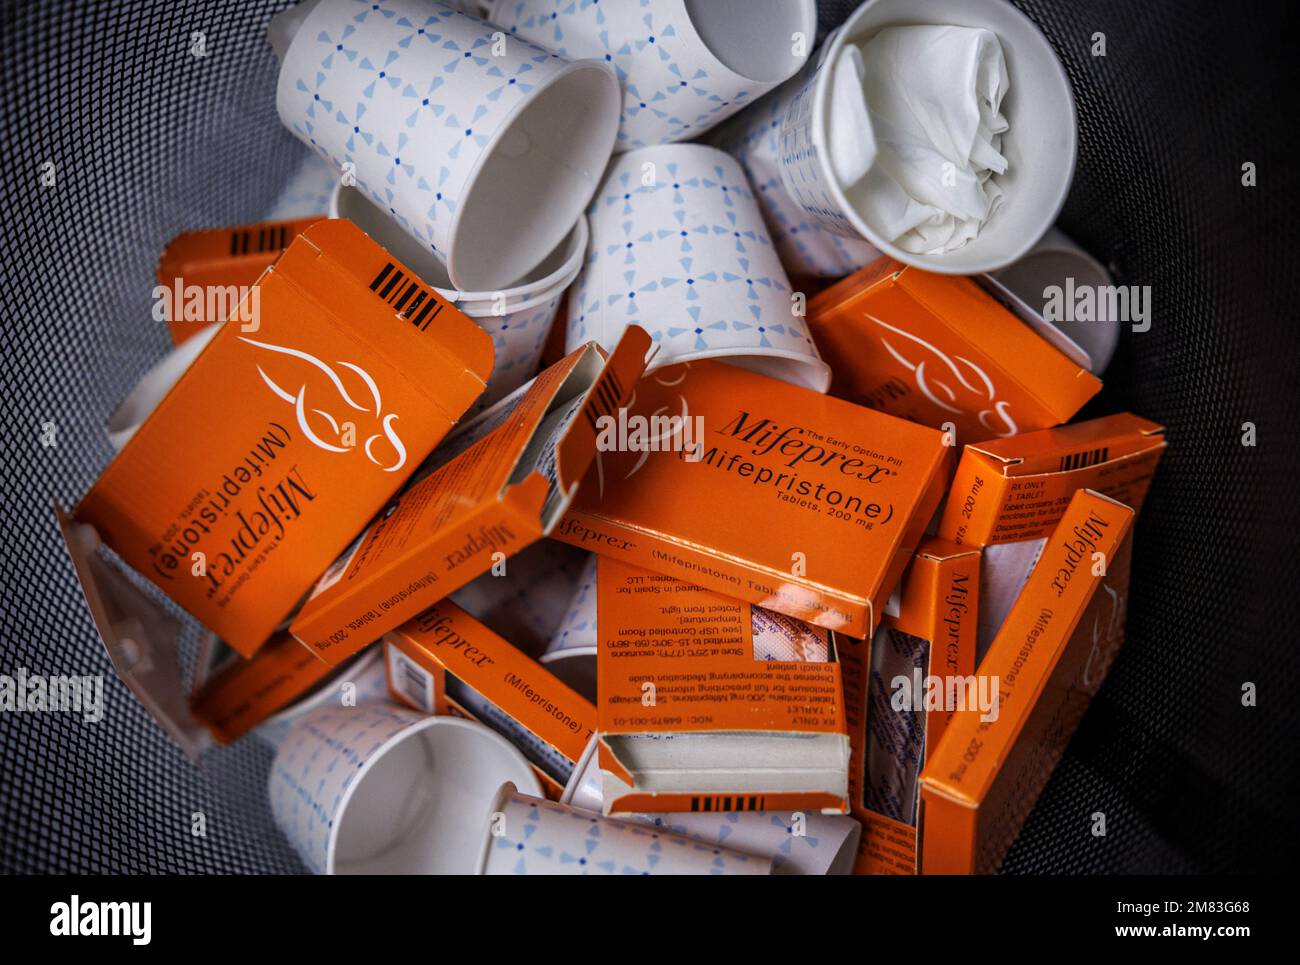 Used boxes of Mifepristone pills, the first drug used in a medical abortion, fill a trash at Alamo Women's Clinic in Albuquerque, New Mexico, U.S., January 11, 2023. REUTERS/Evleyn Hockstein Stock Photo